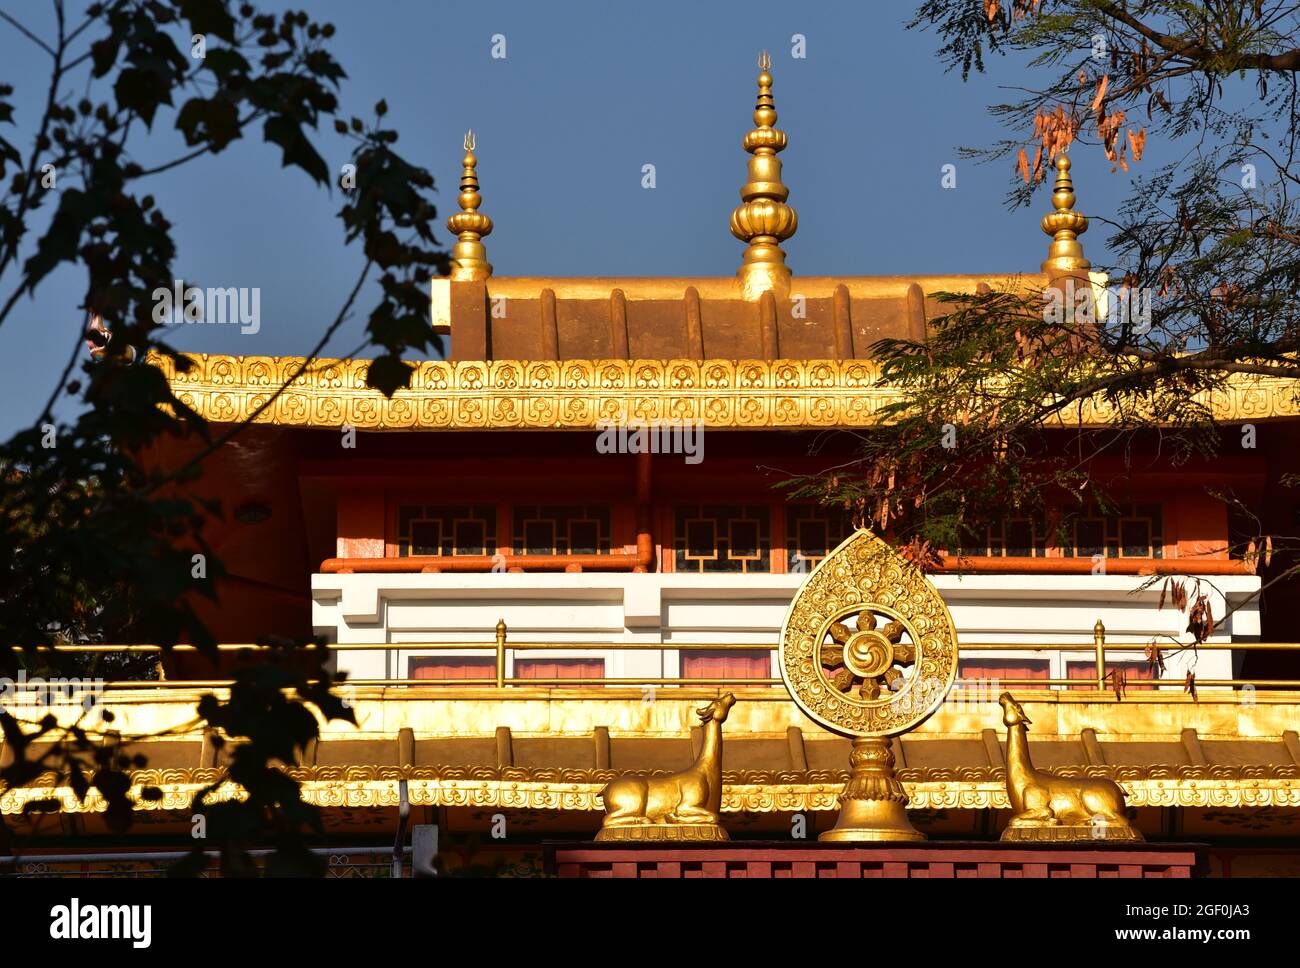 Gilded roofs of the Deden Tsuklagkhang Temple, with the Wheel of Life & two golden deer in the foreground, Norbulingka Institute, Dharamsala, India. Stock Photo